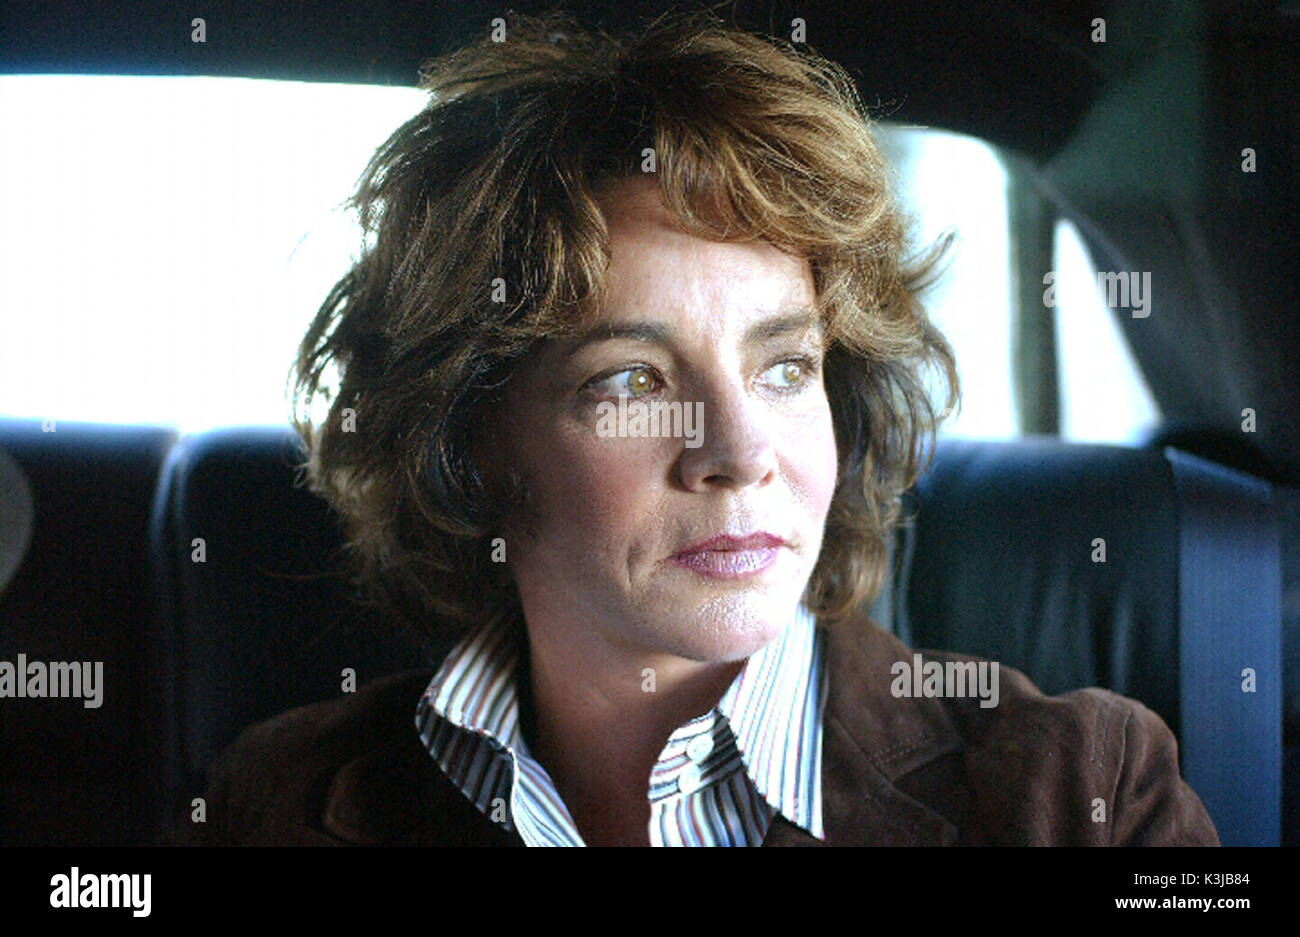 THE WEST WING STOCKARD CHANNING THE WEST WING STOCKARD CHANNING Stock Photo